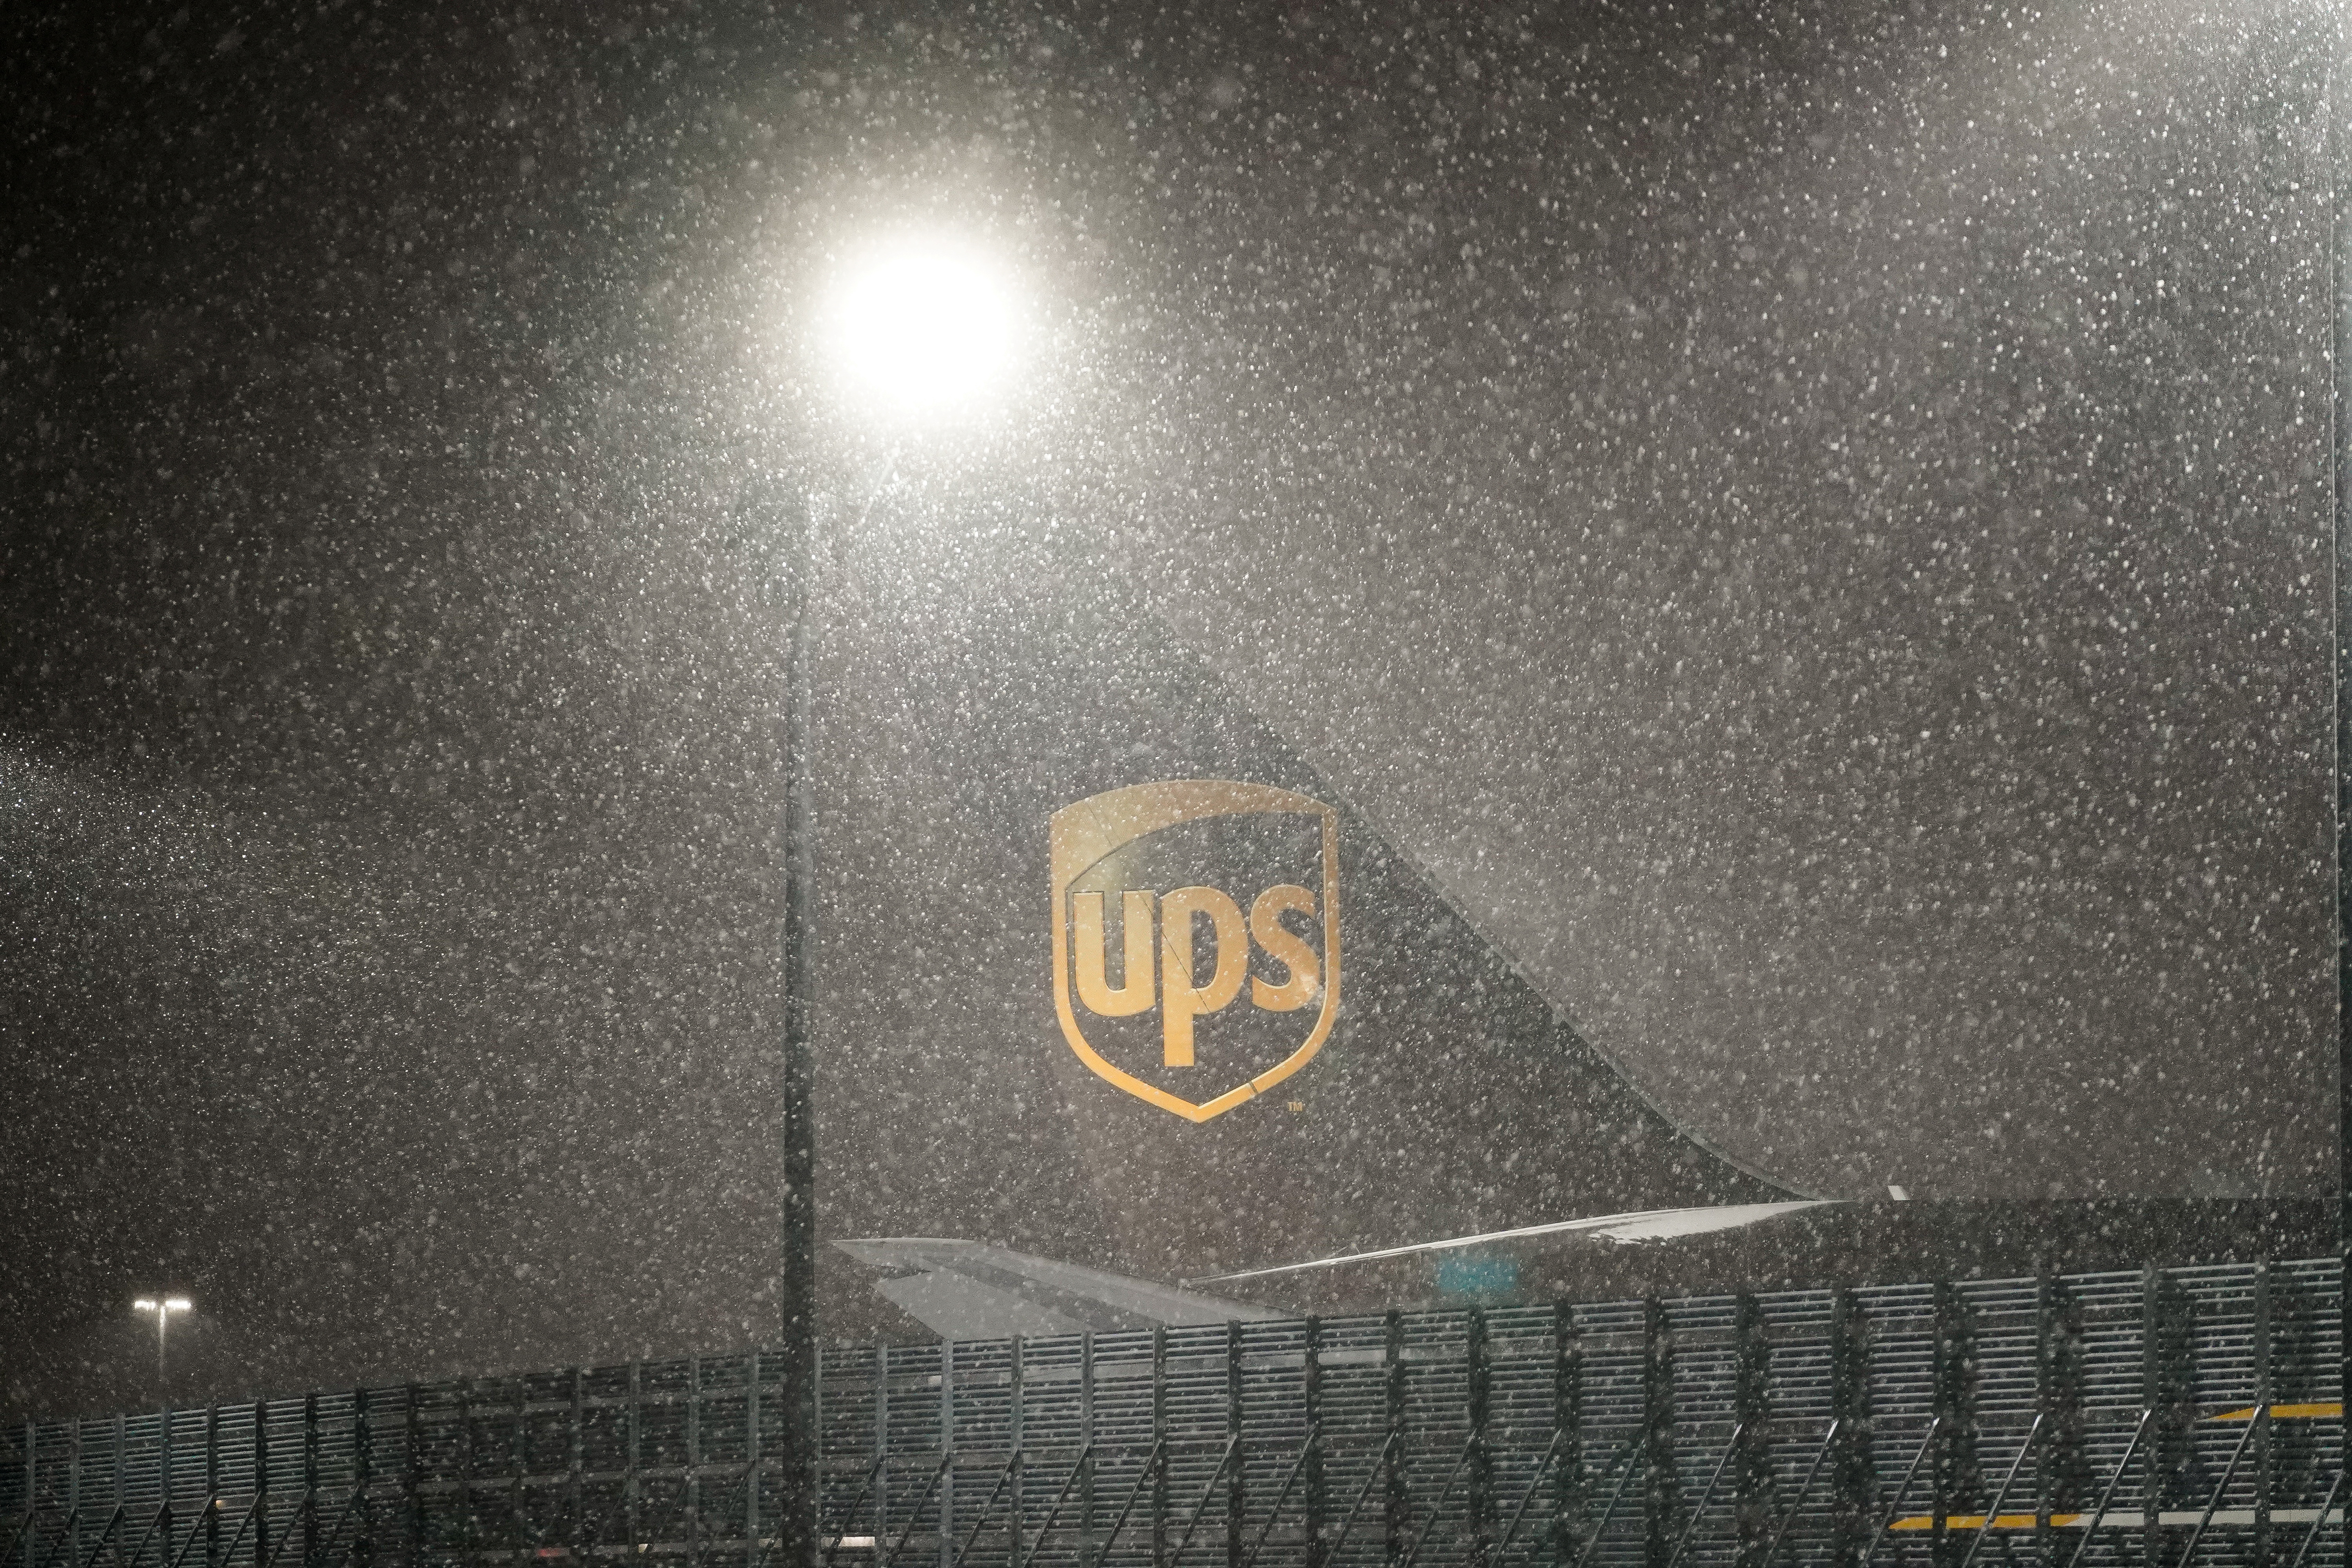 Snow falls at the United Parcel Service (UPS) WorldPort hub located at Louisville Muhammad Ali International Airport in Louisville